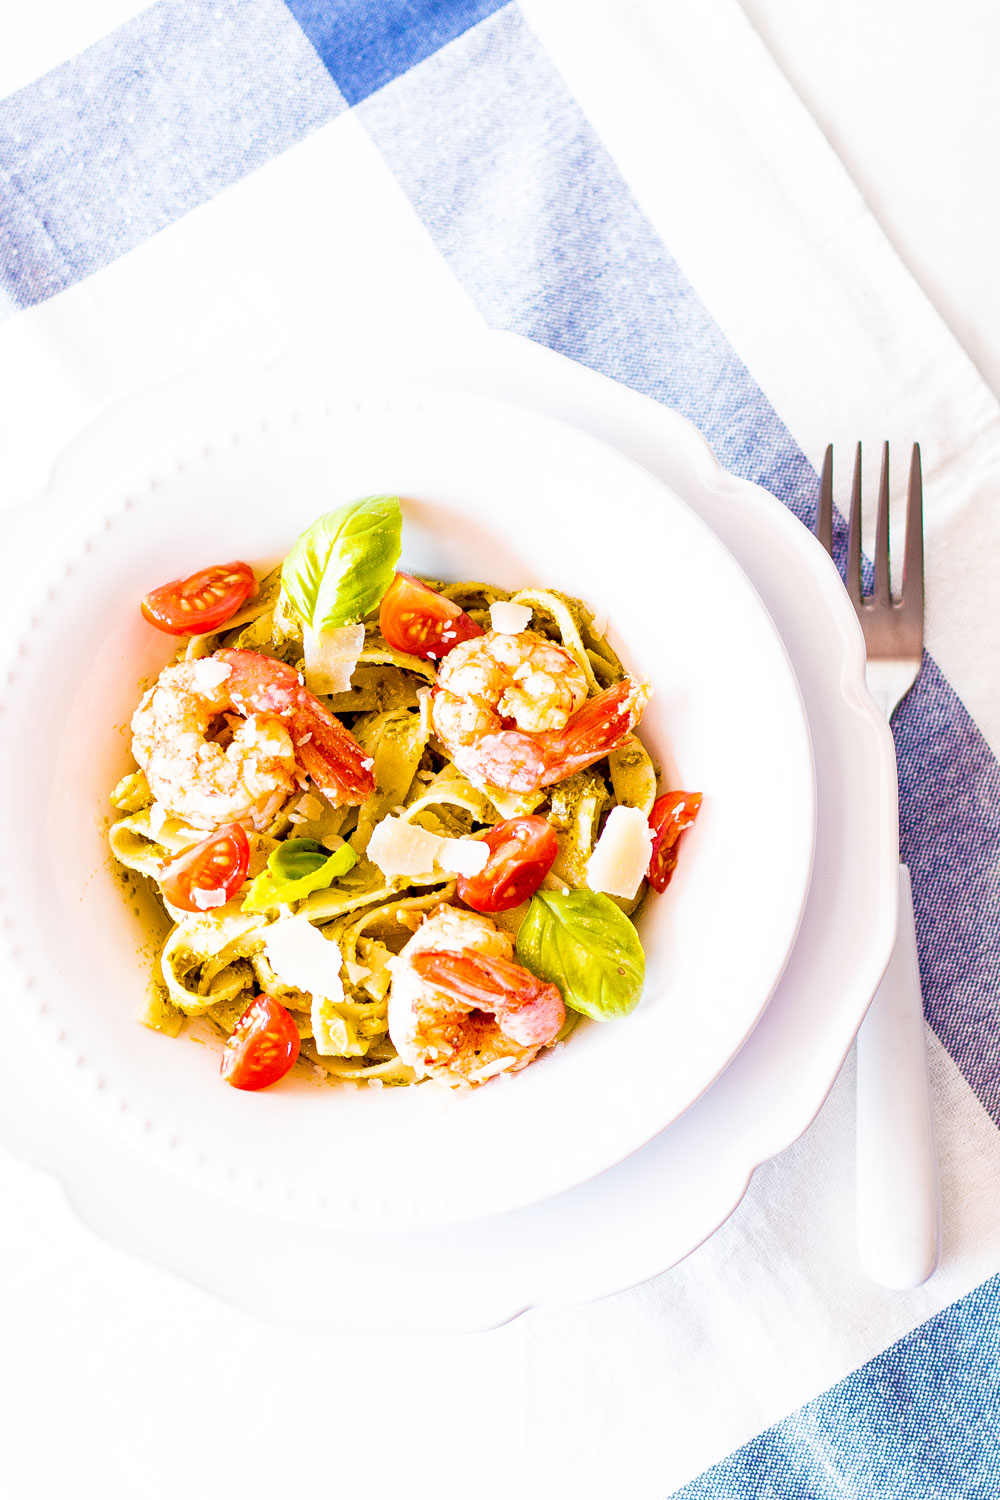 After your workout, make this 20-Minute Pesto Shrimp Pasta and keep the recovery process moving! Dense carb meals, that are also rich in protein and healthy fats, are best consumed after exercise. https://www.spotebi.com/recipes/20-minute-pesto-shrimp-pasta/